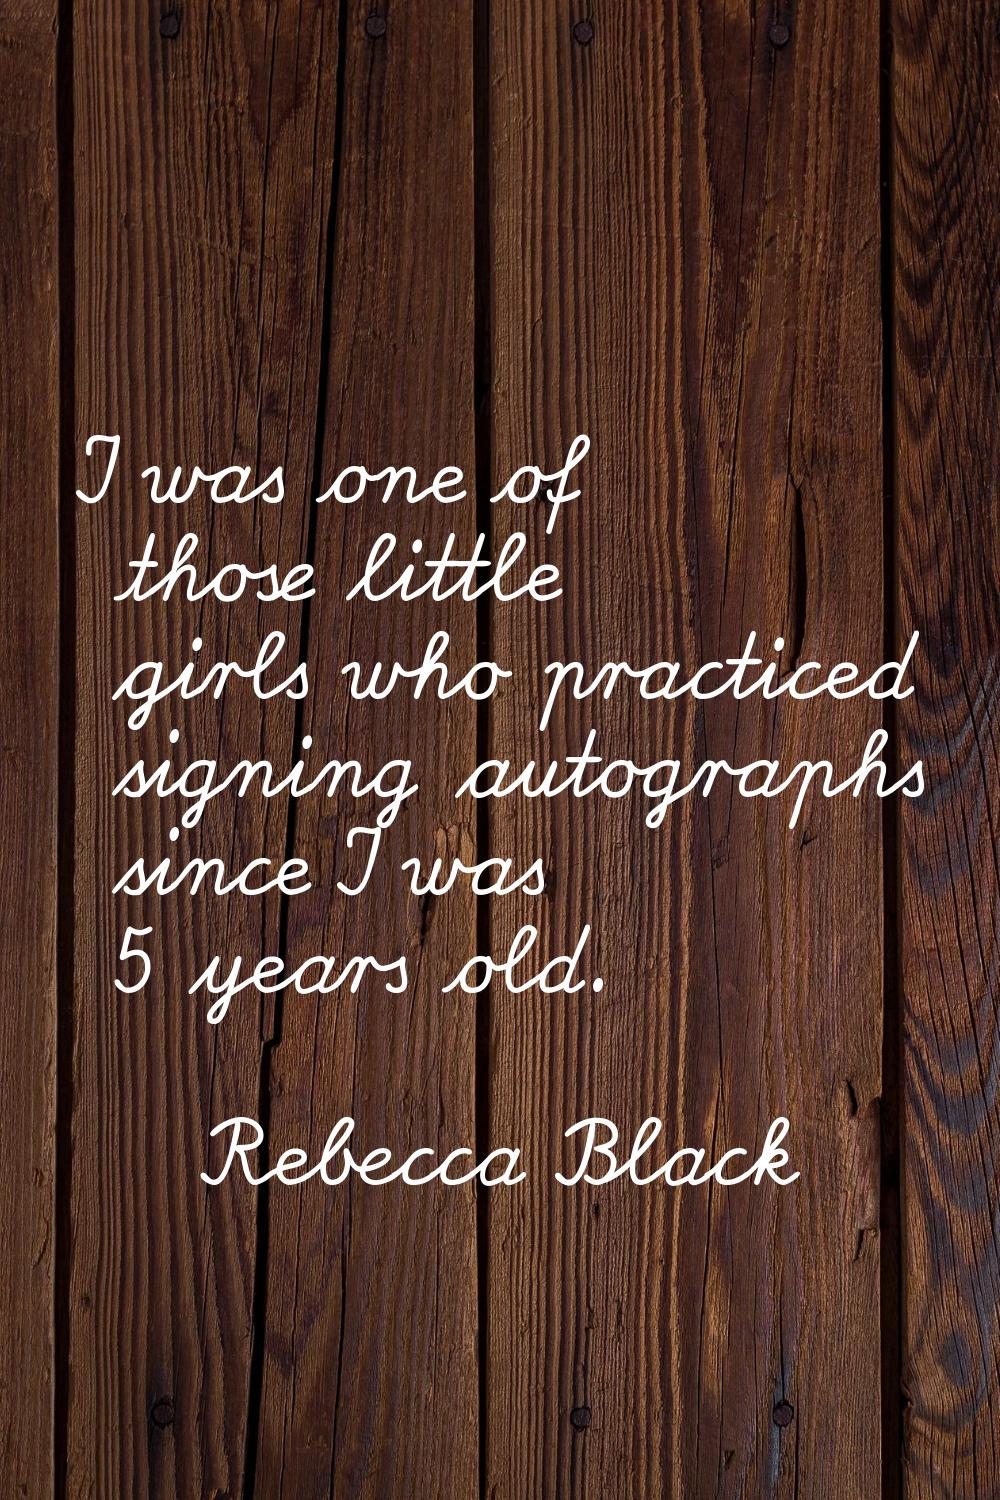 I was one of those little girls who practiced signing autographs since I was 5 years old.